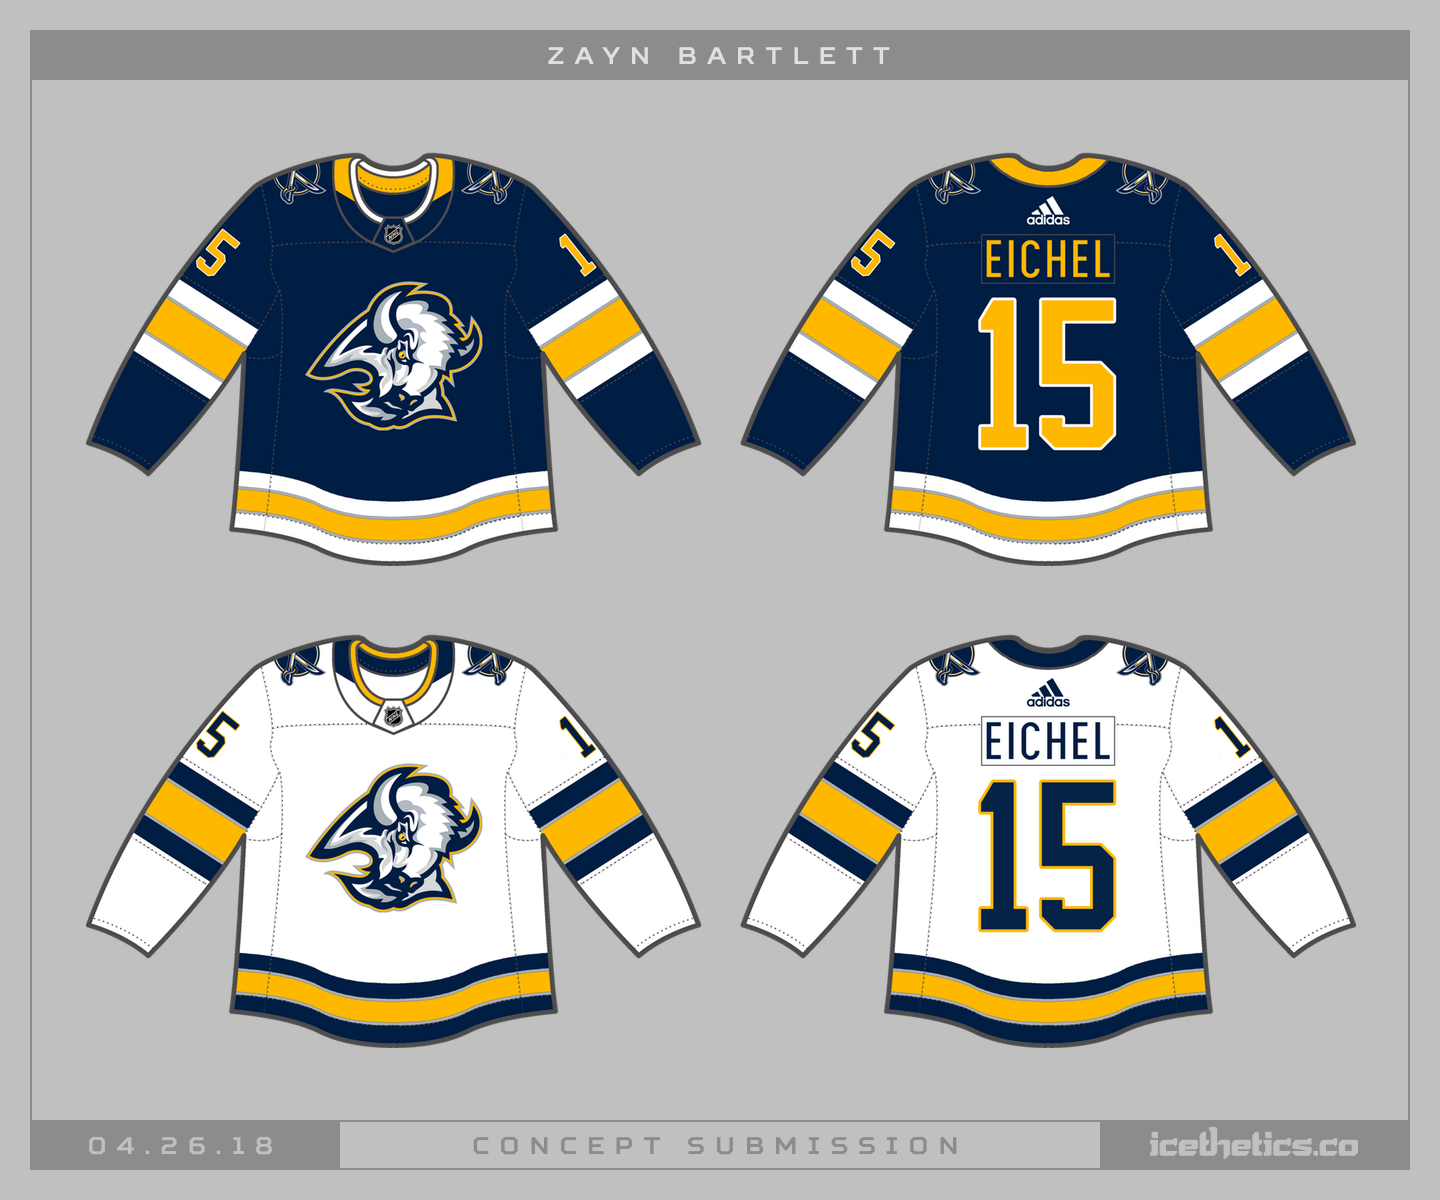 0012: Buffalo's Third Jersey Inversion - Concepts - icethetics.info